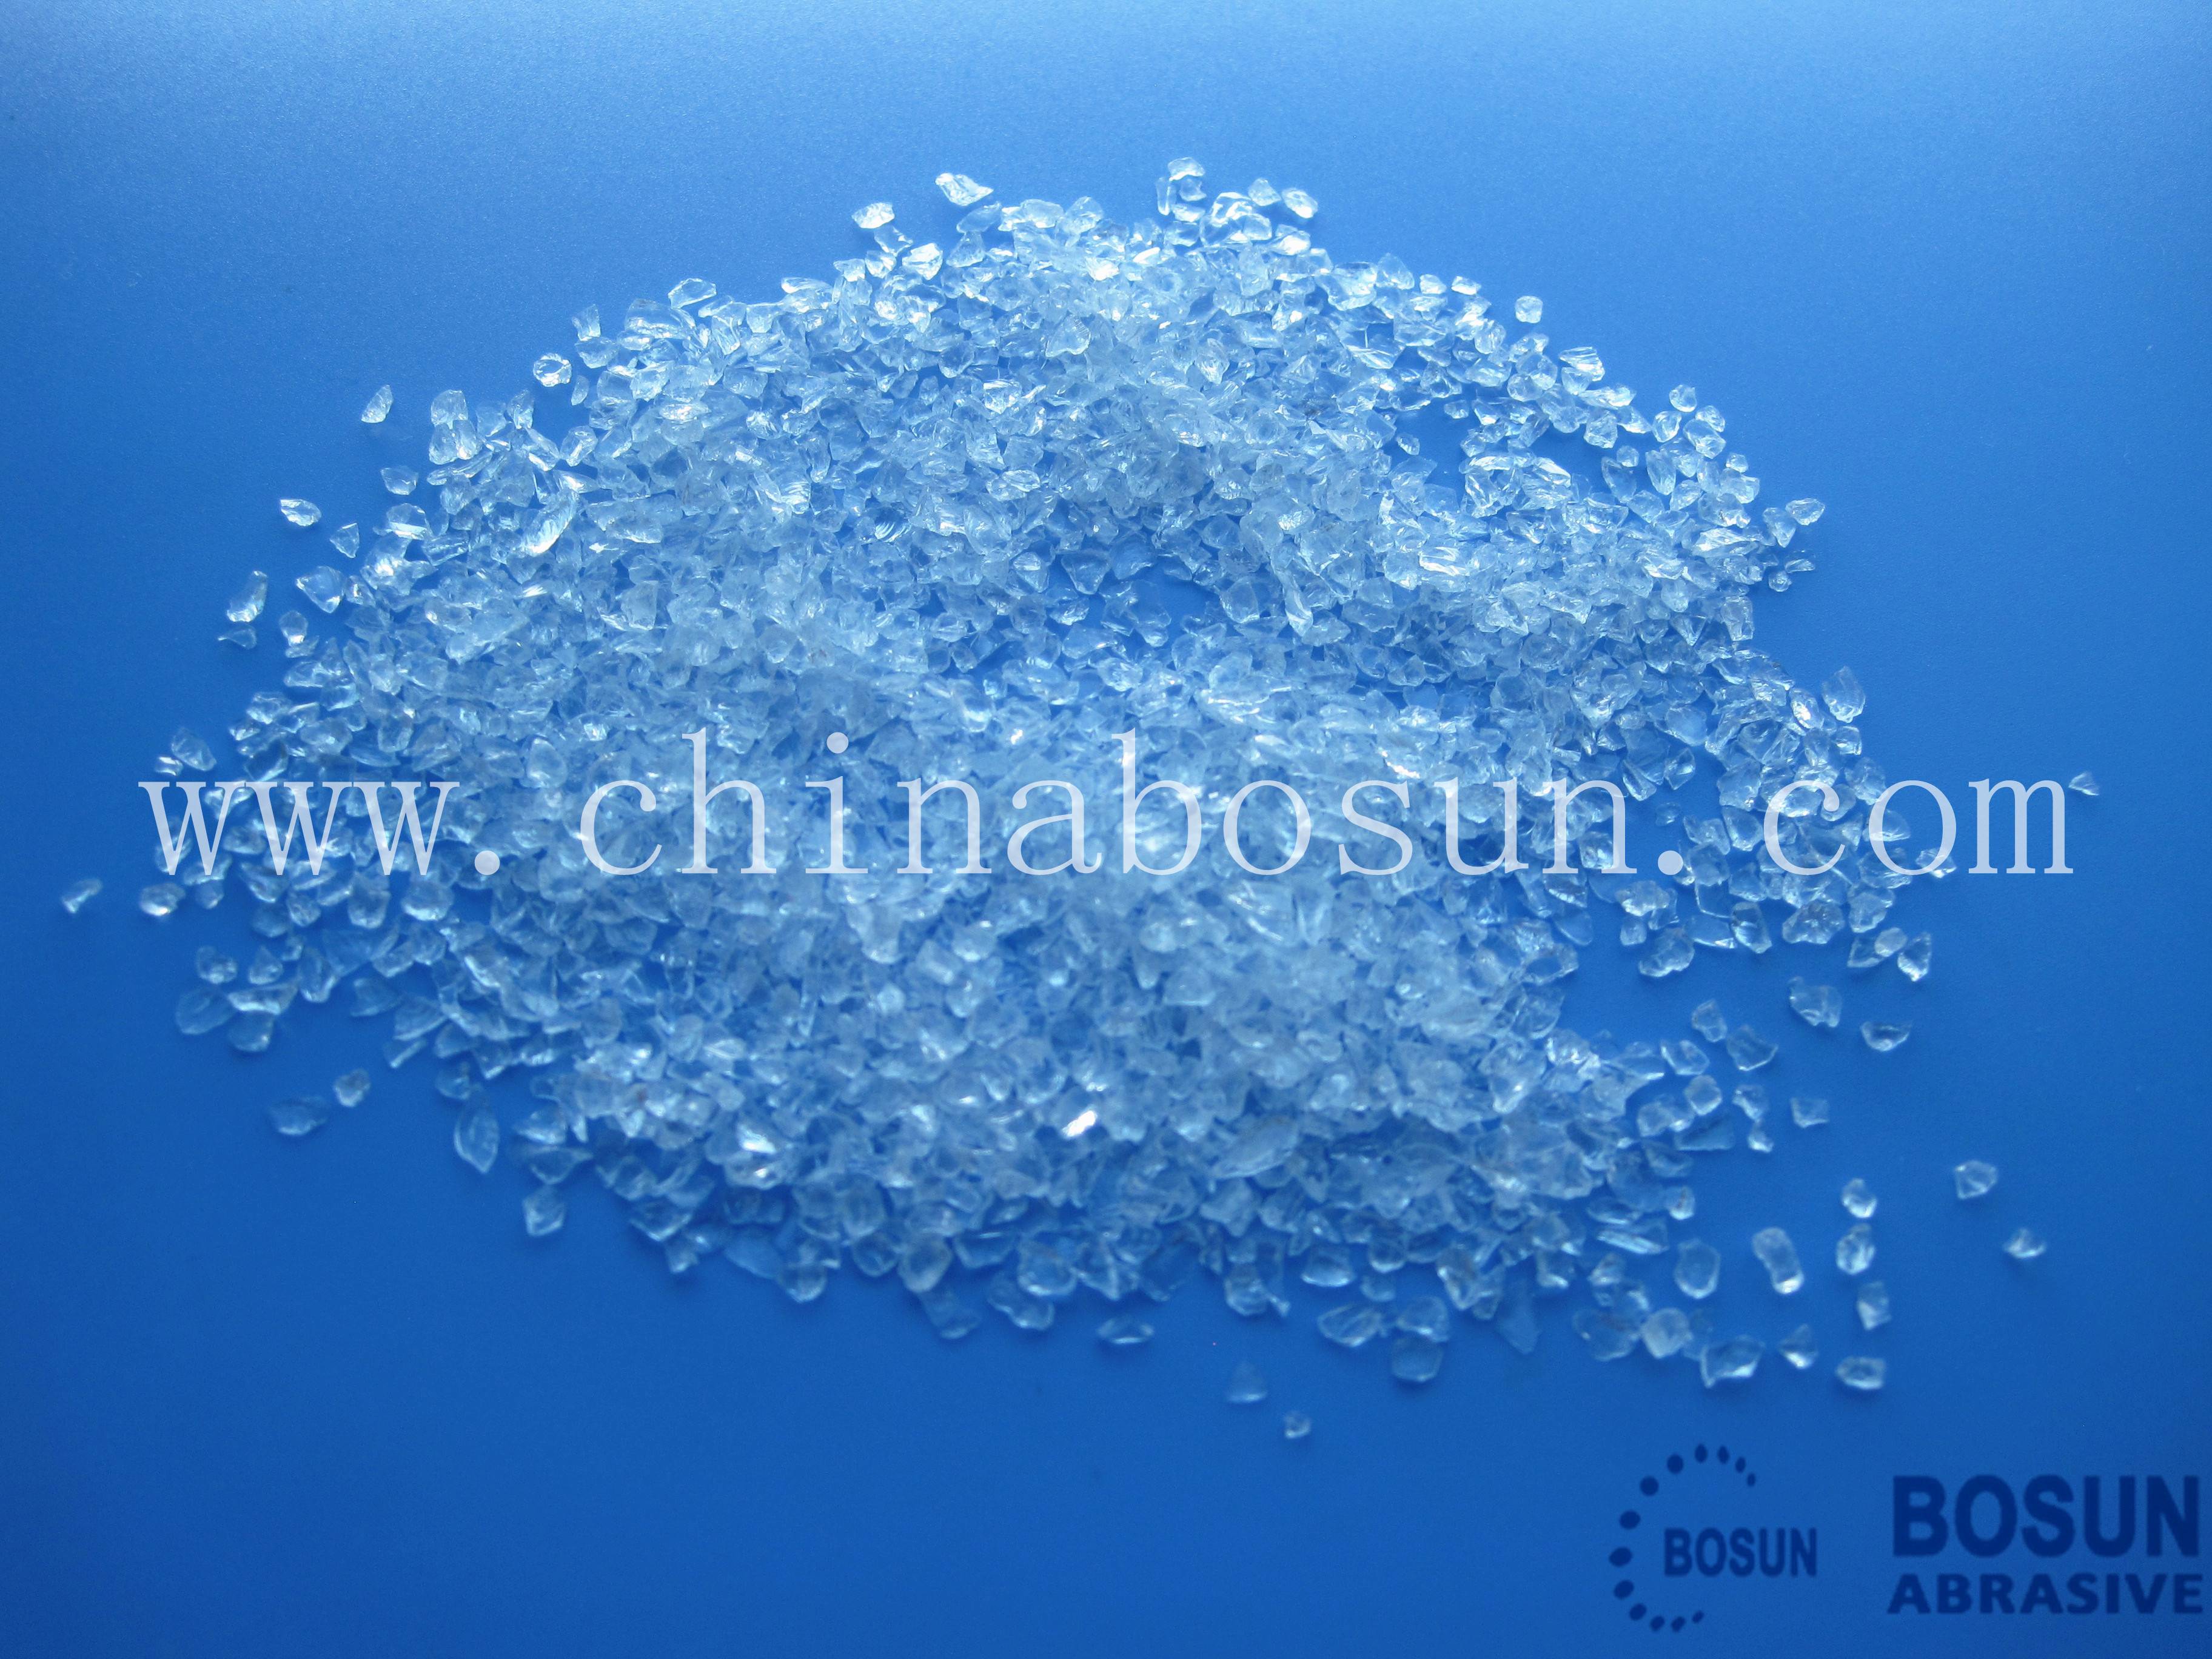 Hot sale Glass Beads 1.25-2.5MM for Thailand Importers